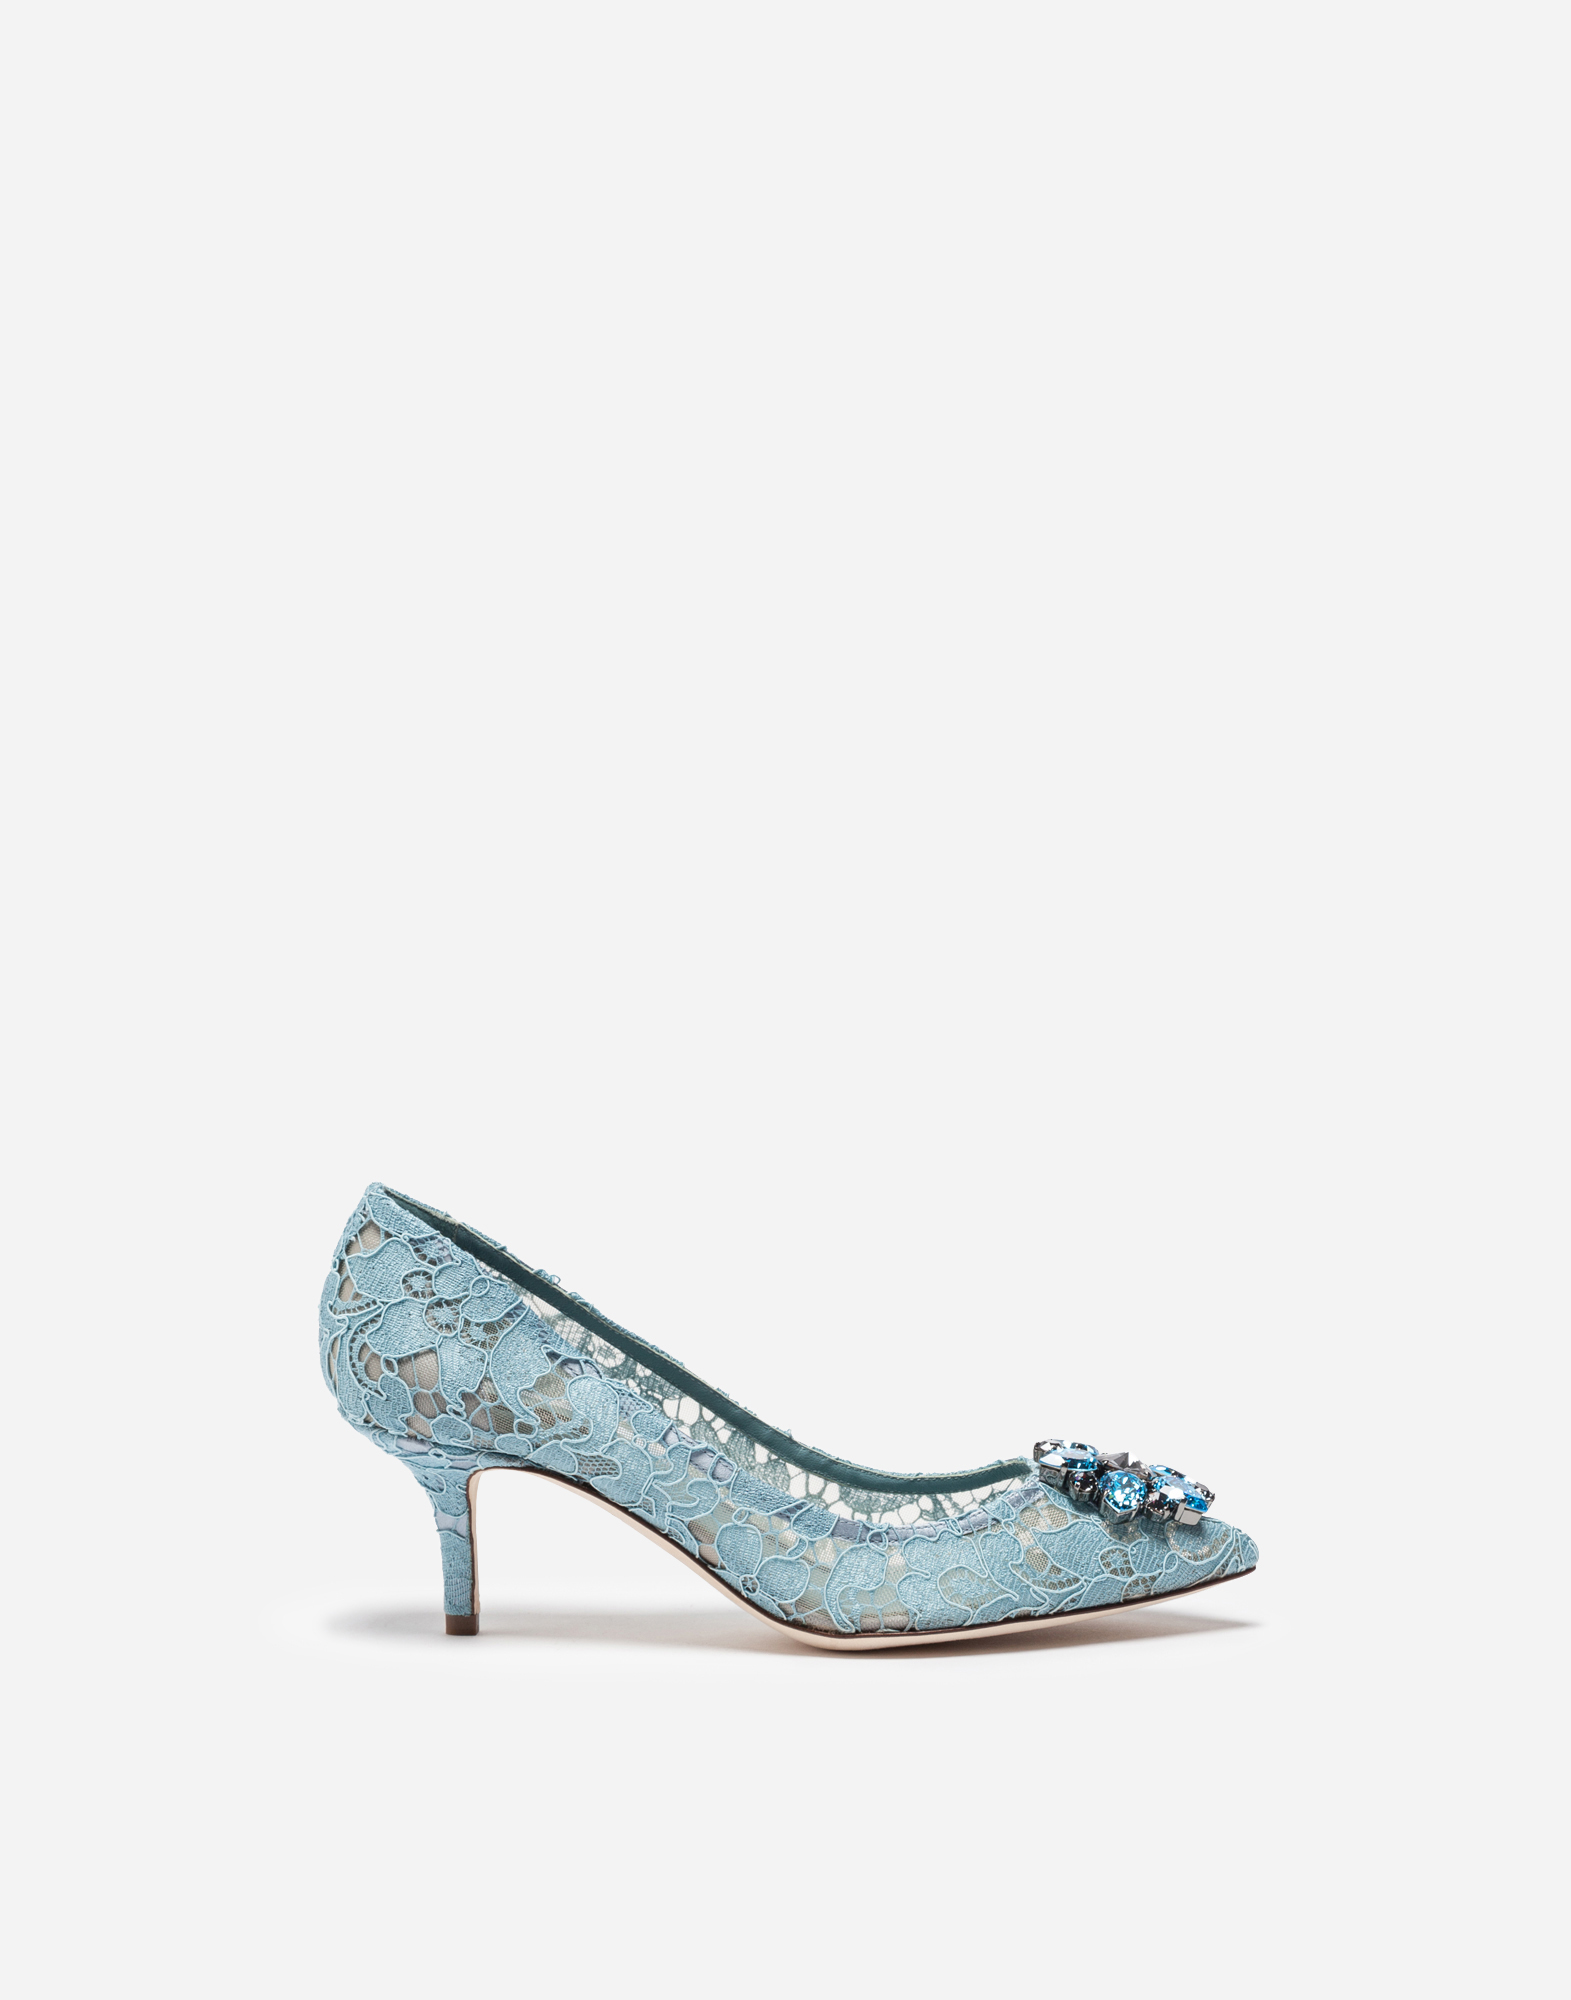 Pump in Taormina lace with crystals in Azure